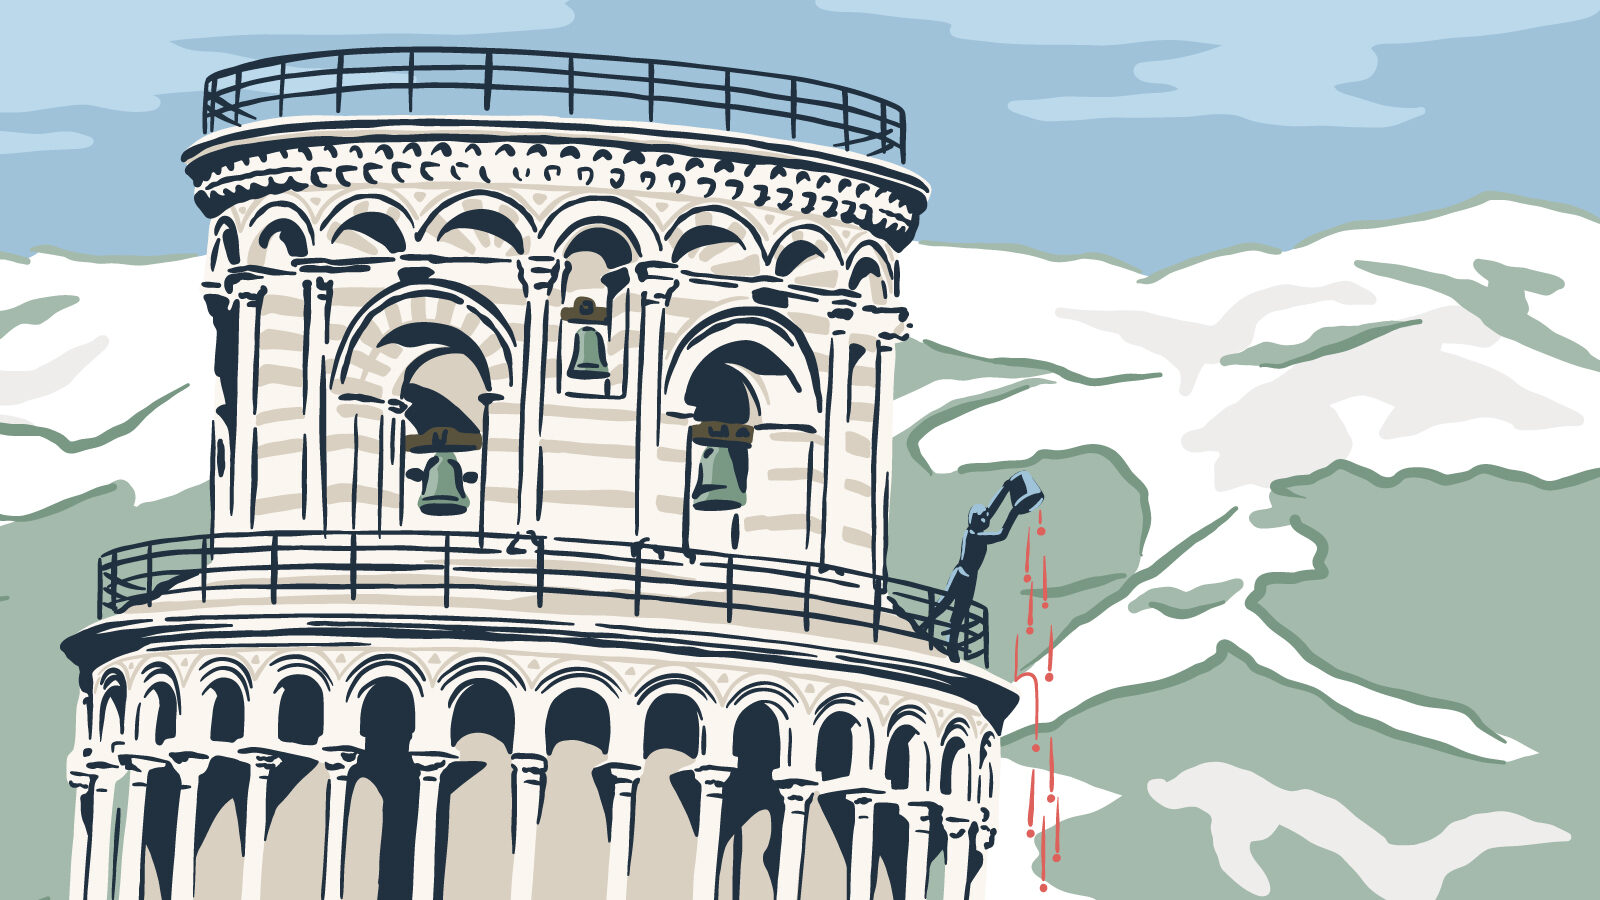 Illustration of someone dropping something off the leaning tower of Pisa